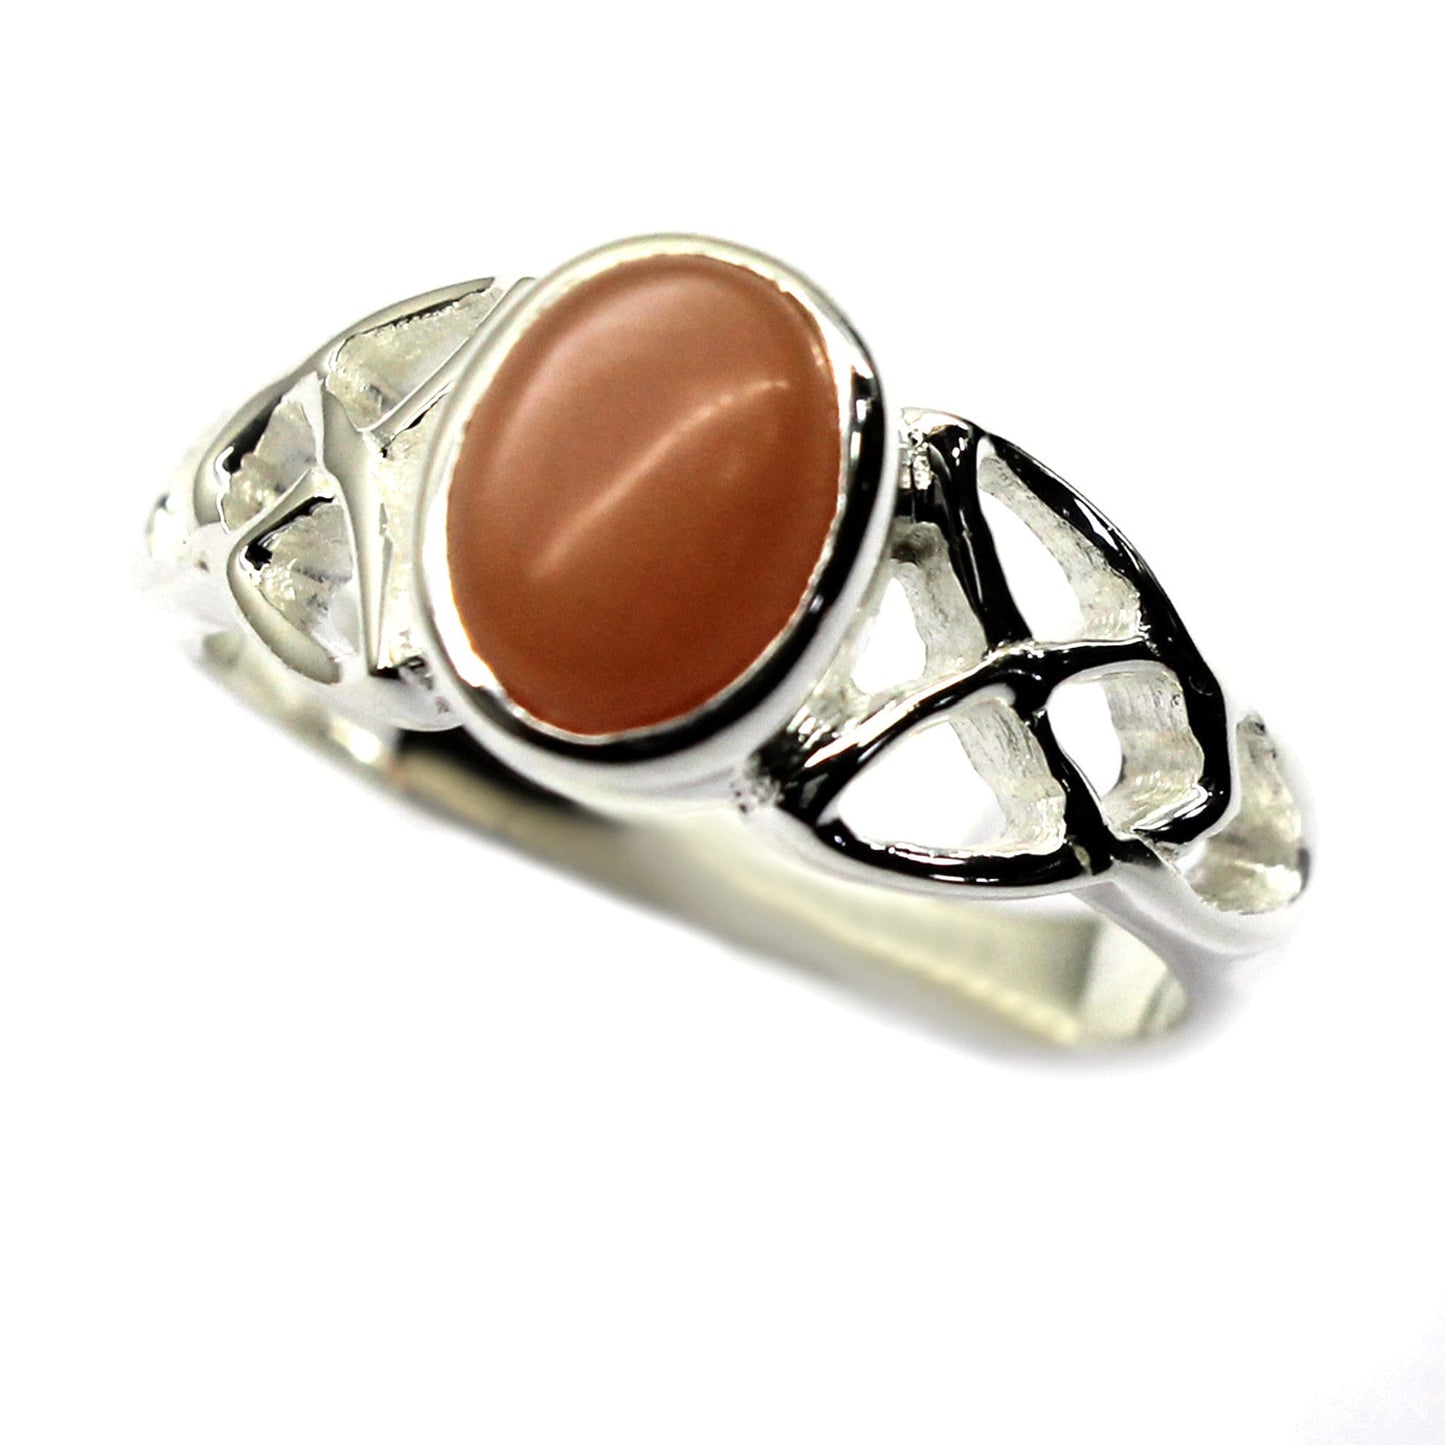 Natural Peach Moonstone Gemstone Ring 925 Sterling Silver Ring Classic Ring For Women Solitaire Ring Fine Jewelry Gift For Her